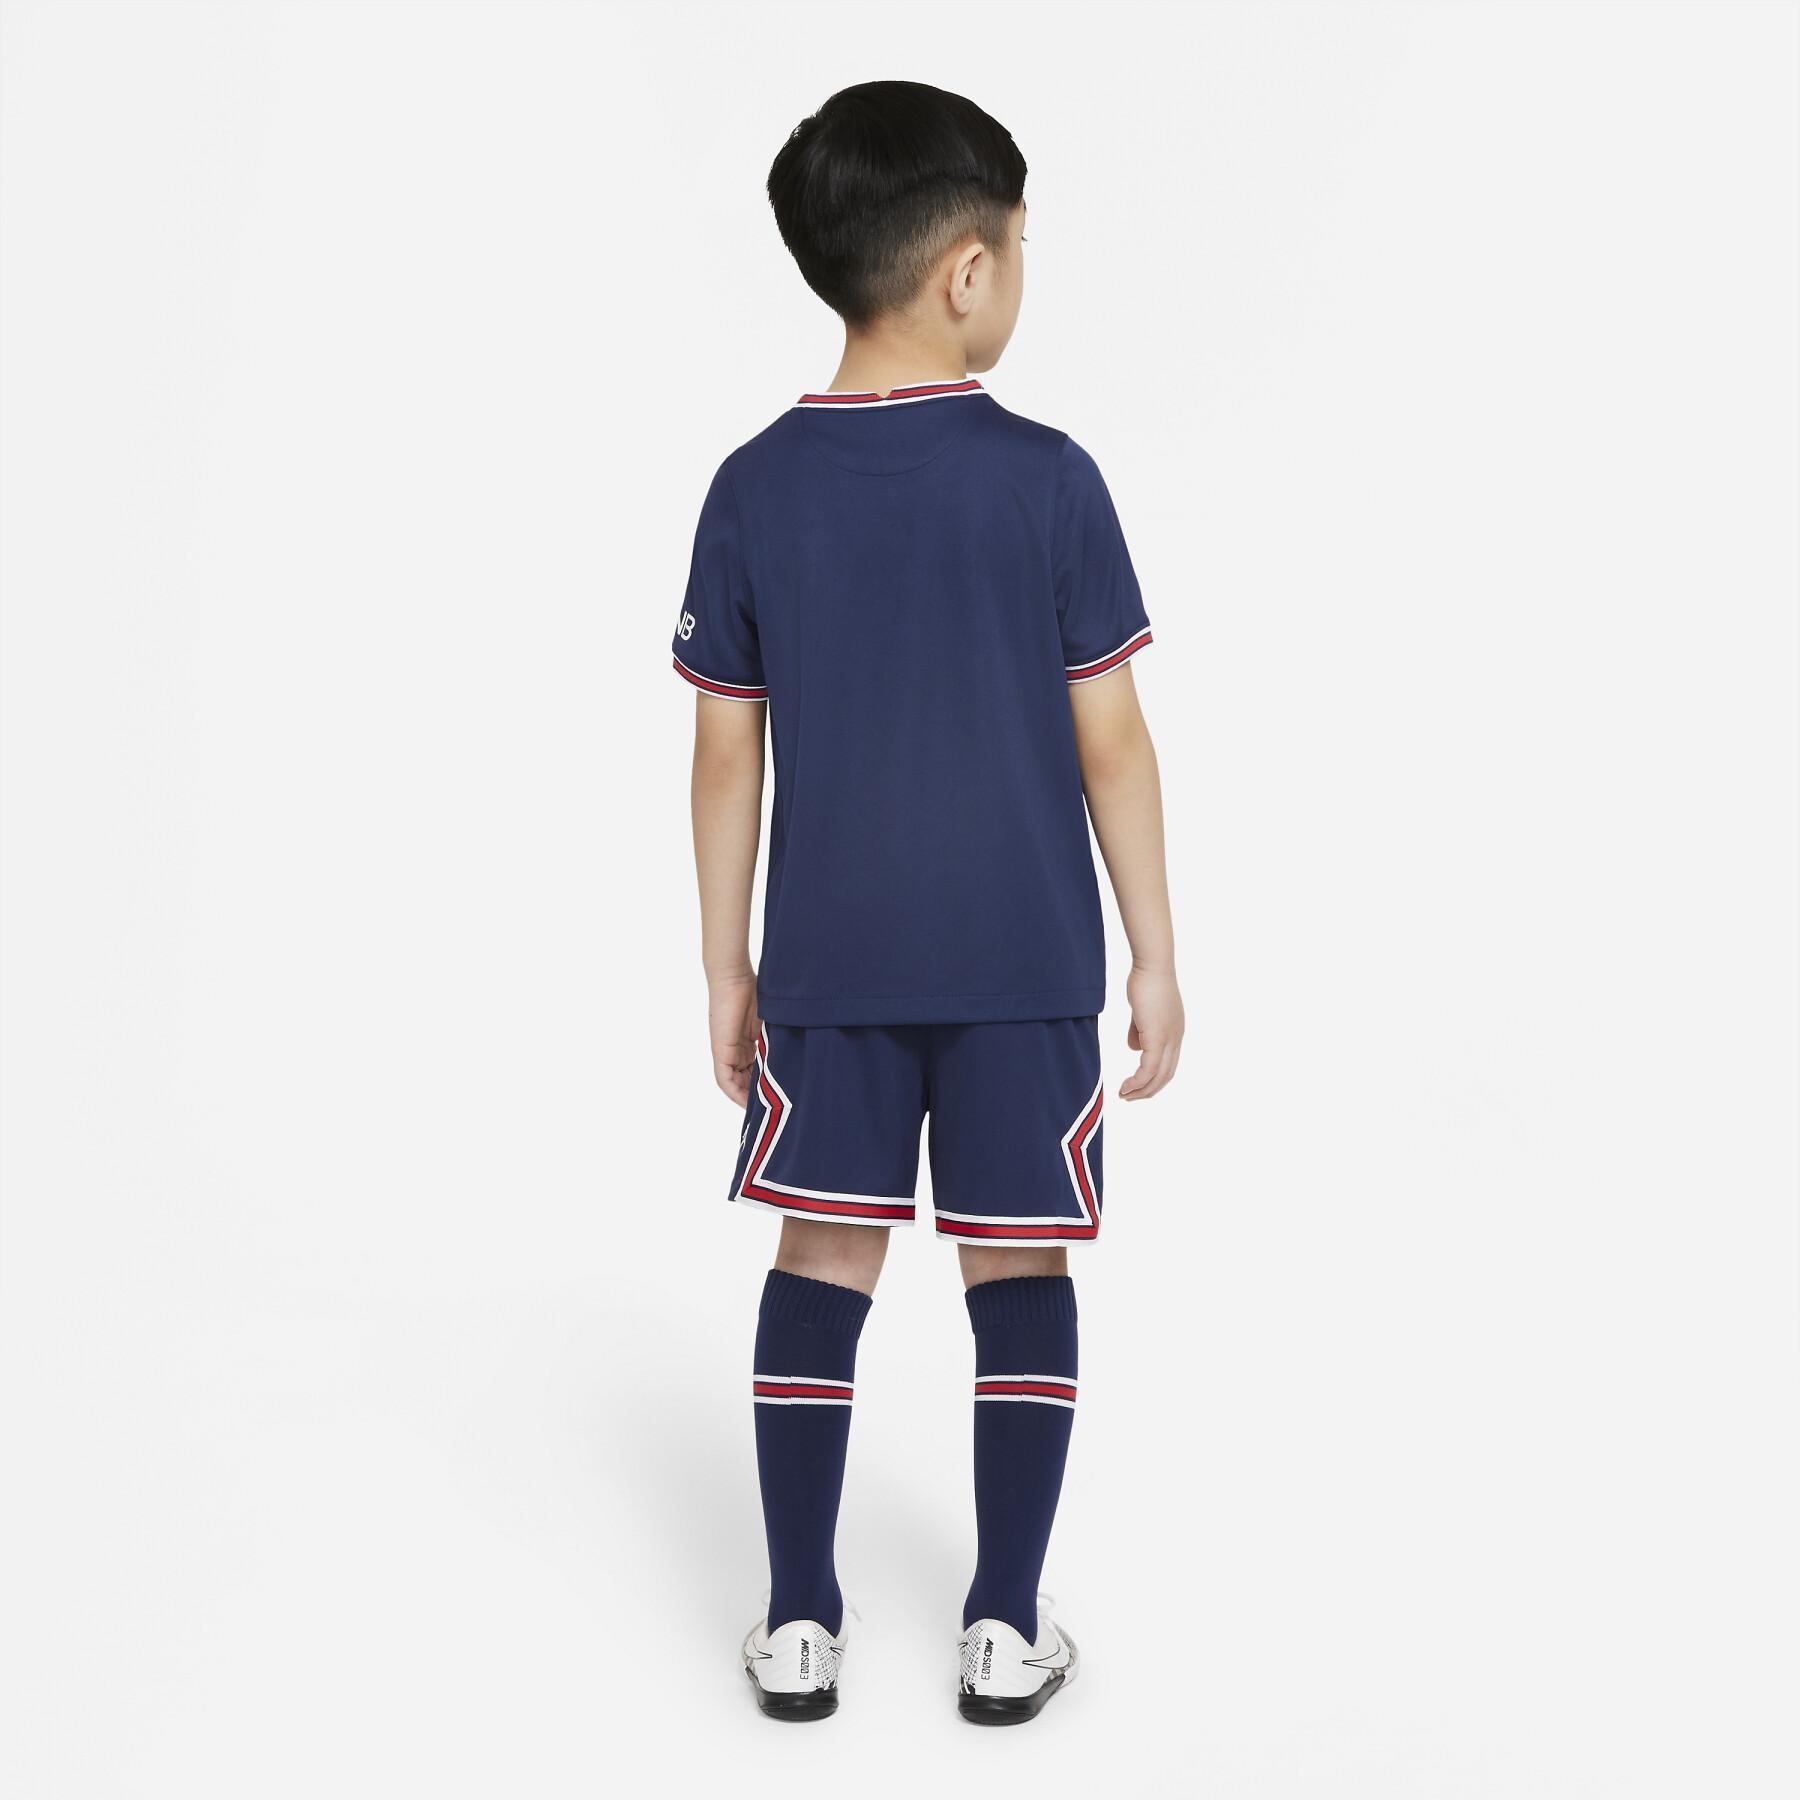 Home and Child Package PSG 2021/22